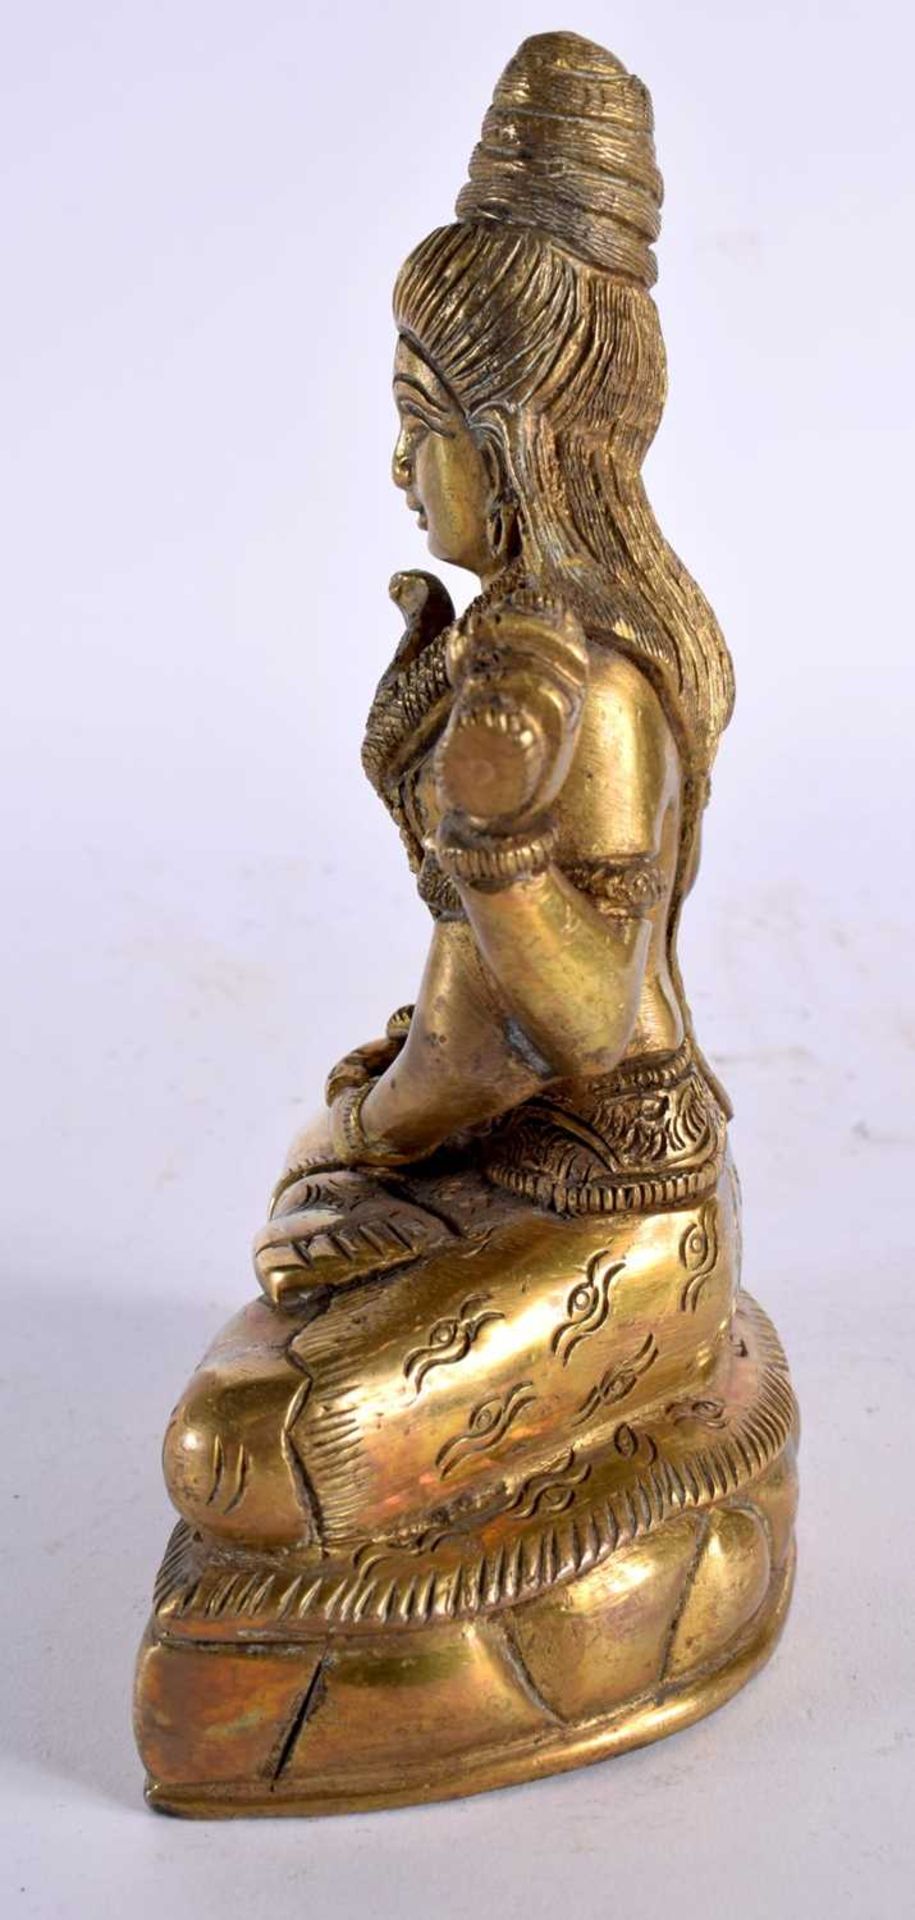 A 19TH CENTURY INDIAN BRONZE HINDU FIGURE OF SHIVA modelled seated on a lion skin with vasuki, - Image 5 of 8